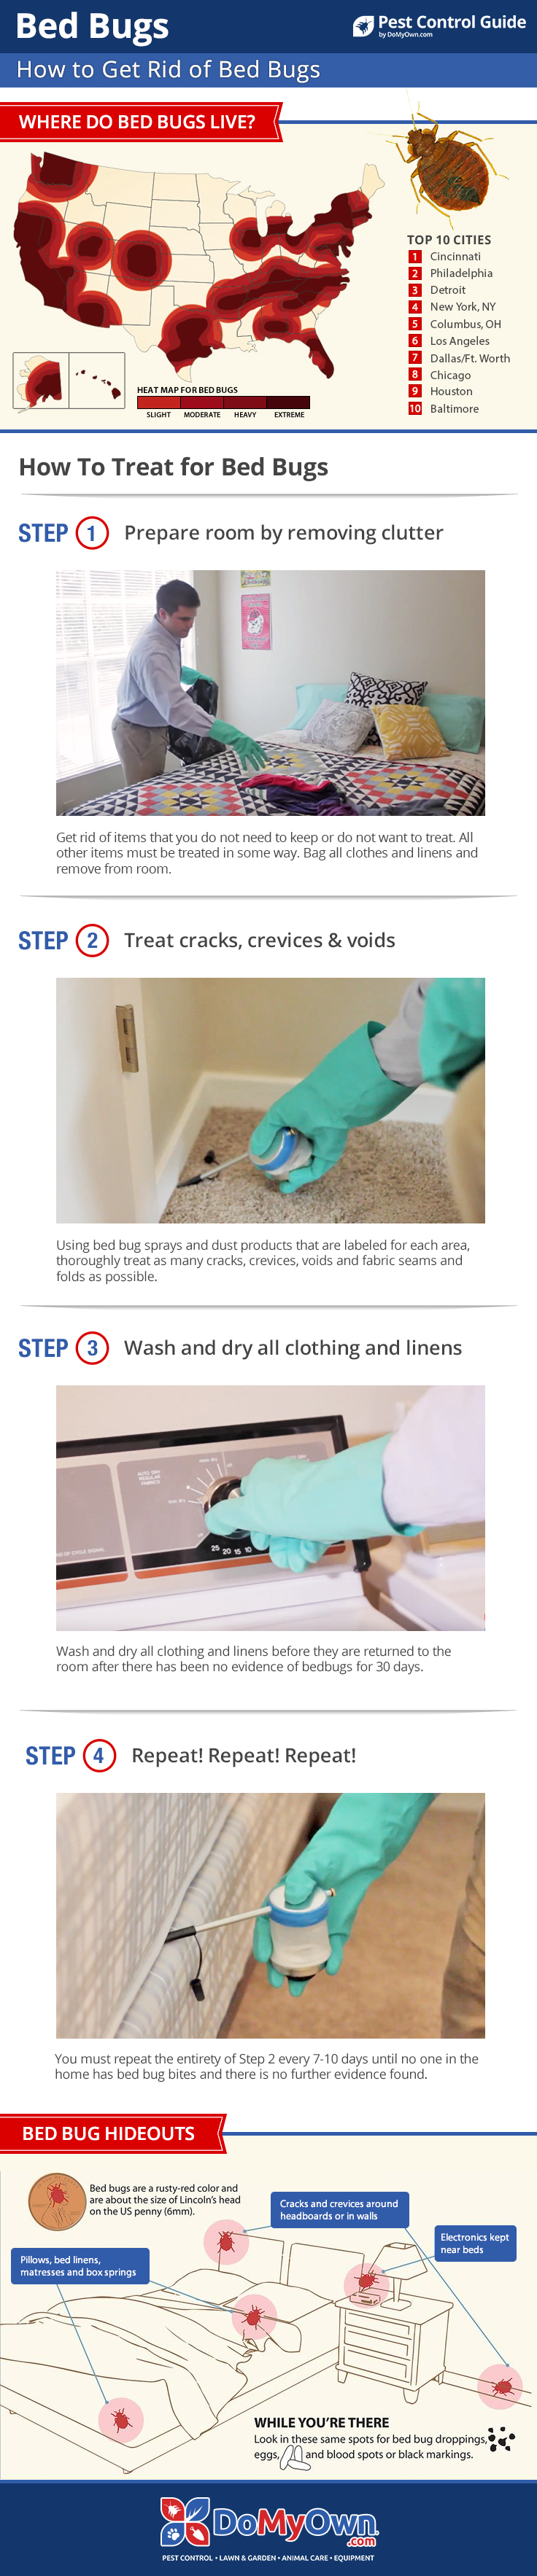 How To Get Rid Of Kill Bed Bugs Yourself Diy Bed Bug Treatment within Fantastic How To Get Rid Of Bed Bugs In Clothes – Perfect Image Reference